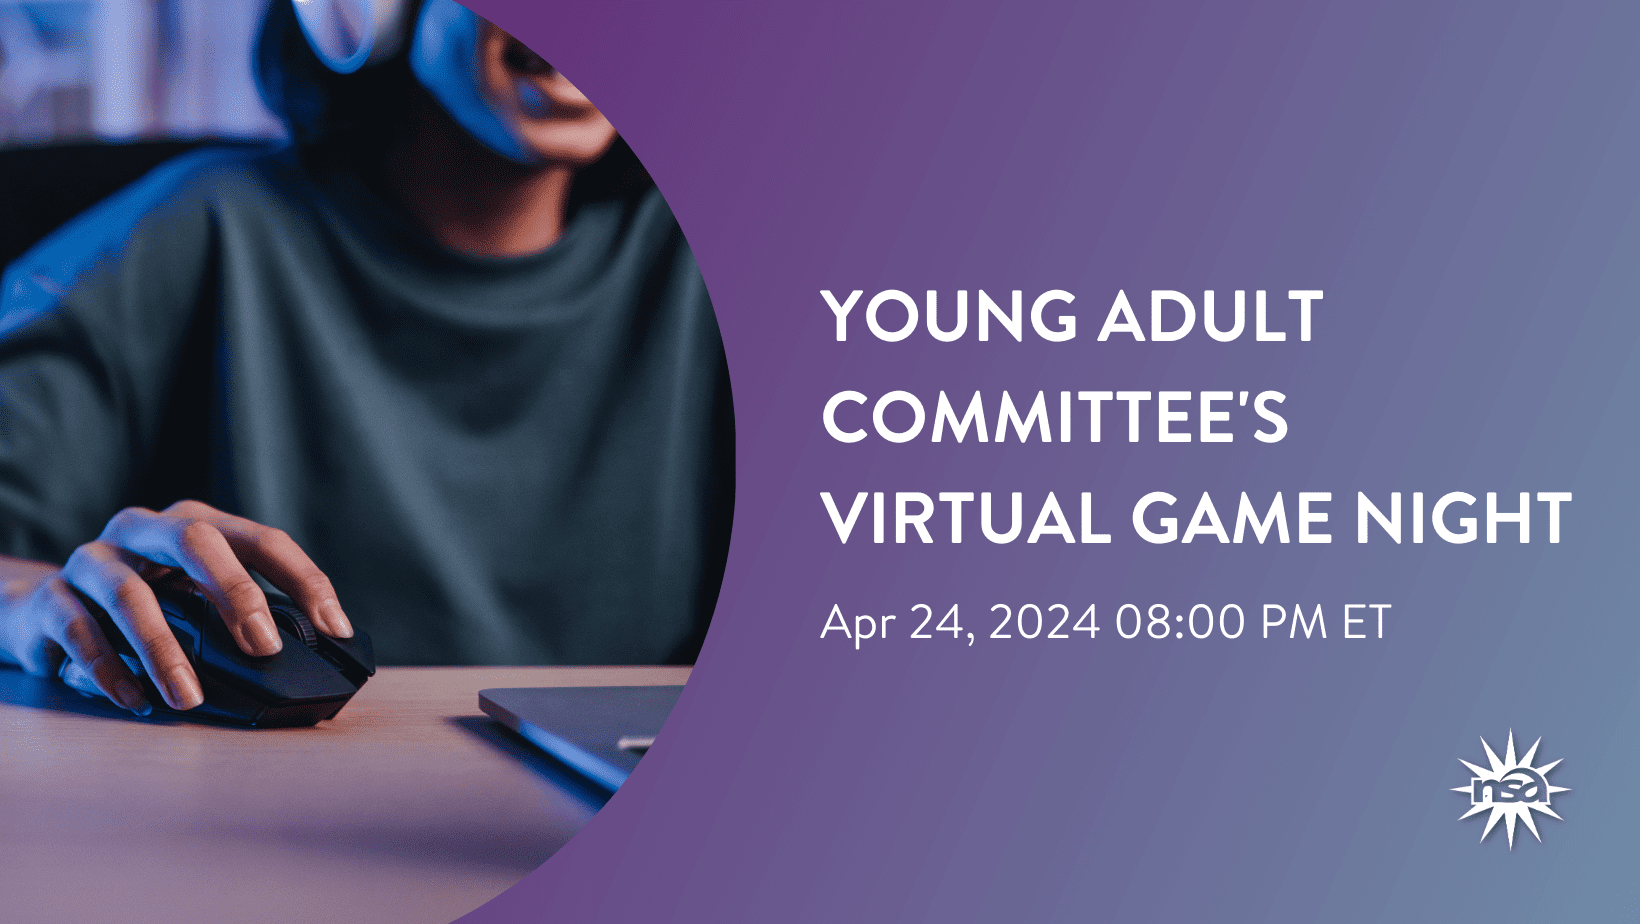 Promotional graphic for Young Adults Virtual Game Night on April 24, 2024, featuring a person wearing headphones and using a gaming mouse.